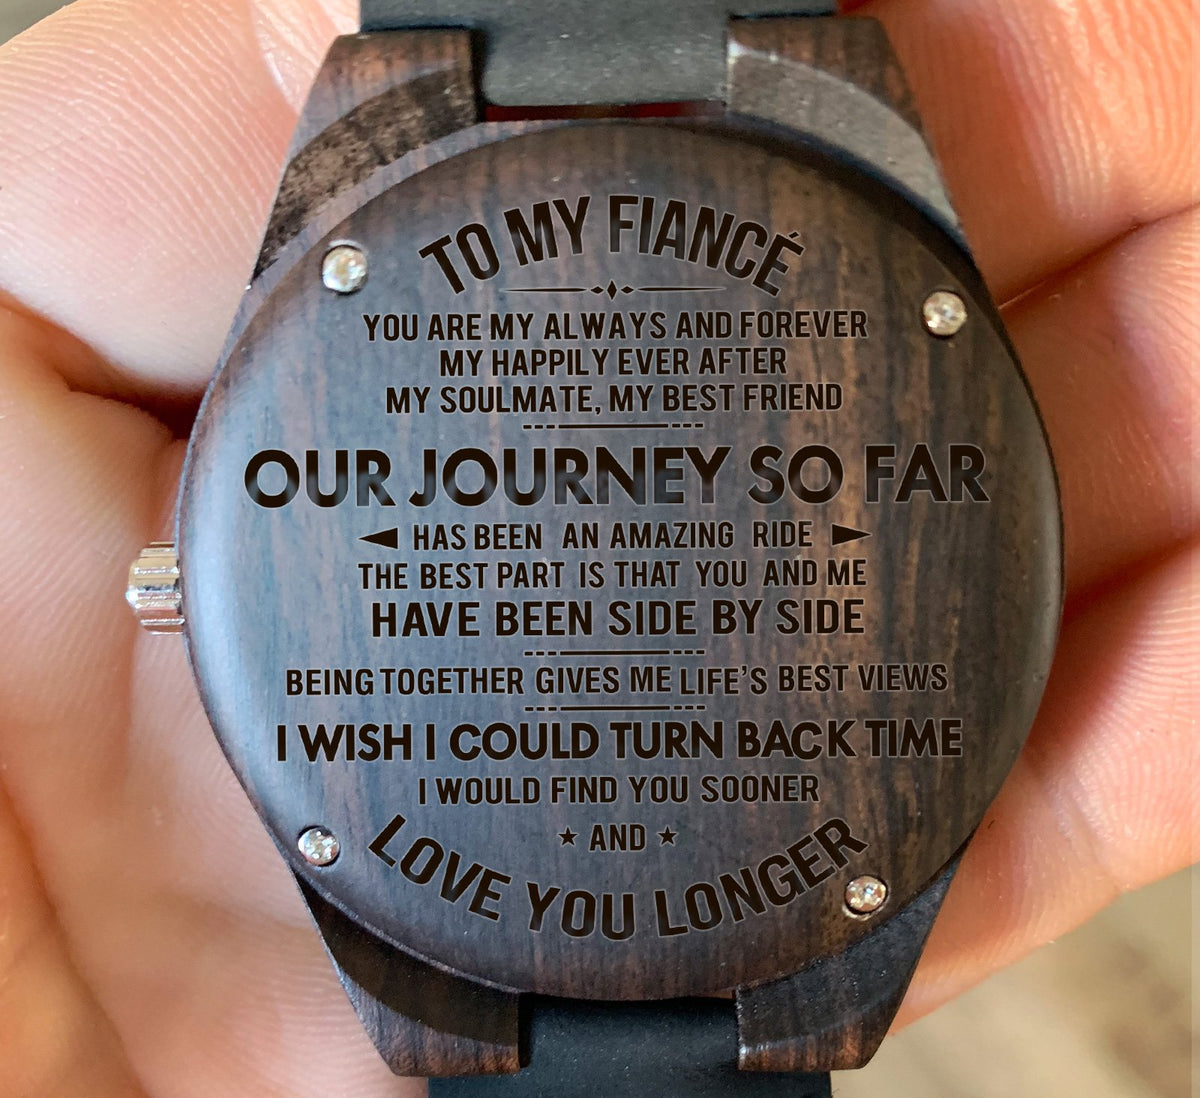 To My Fiance - You Are My Always and Forever - Wooden Watch